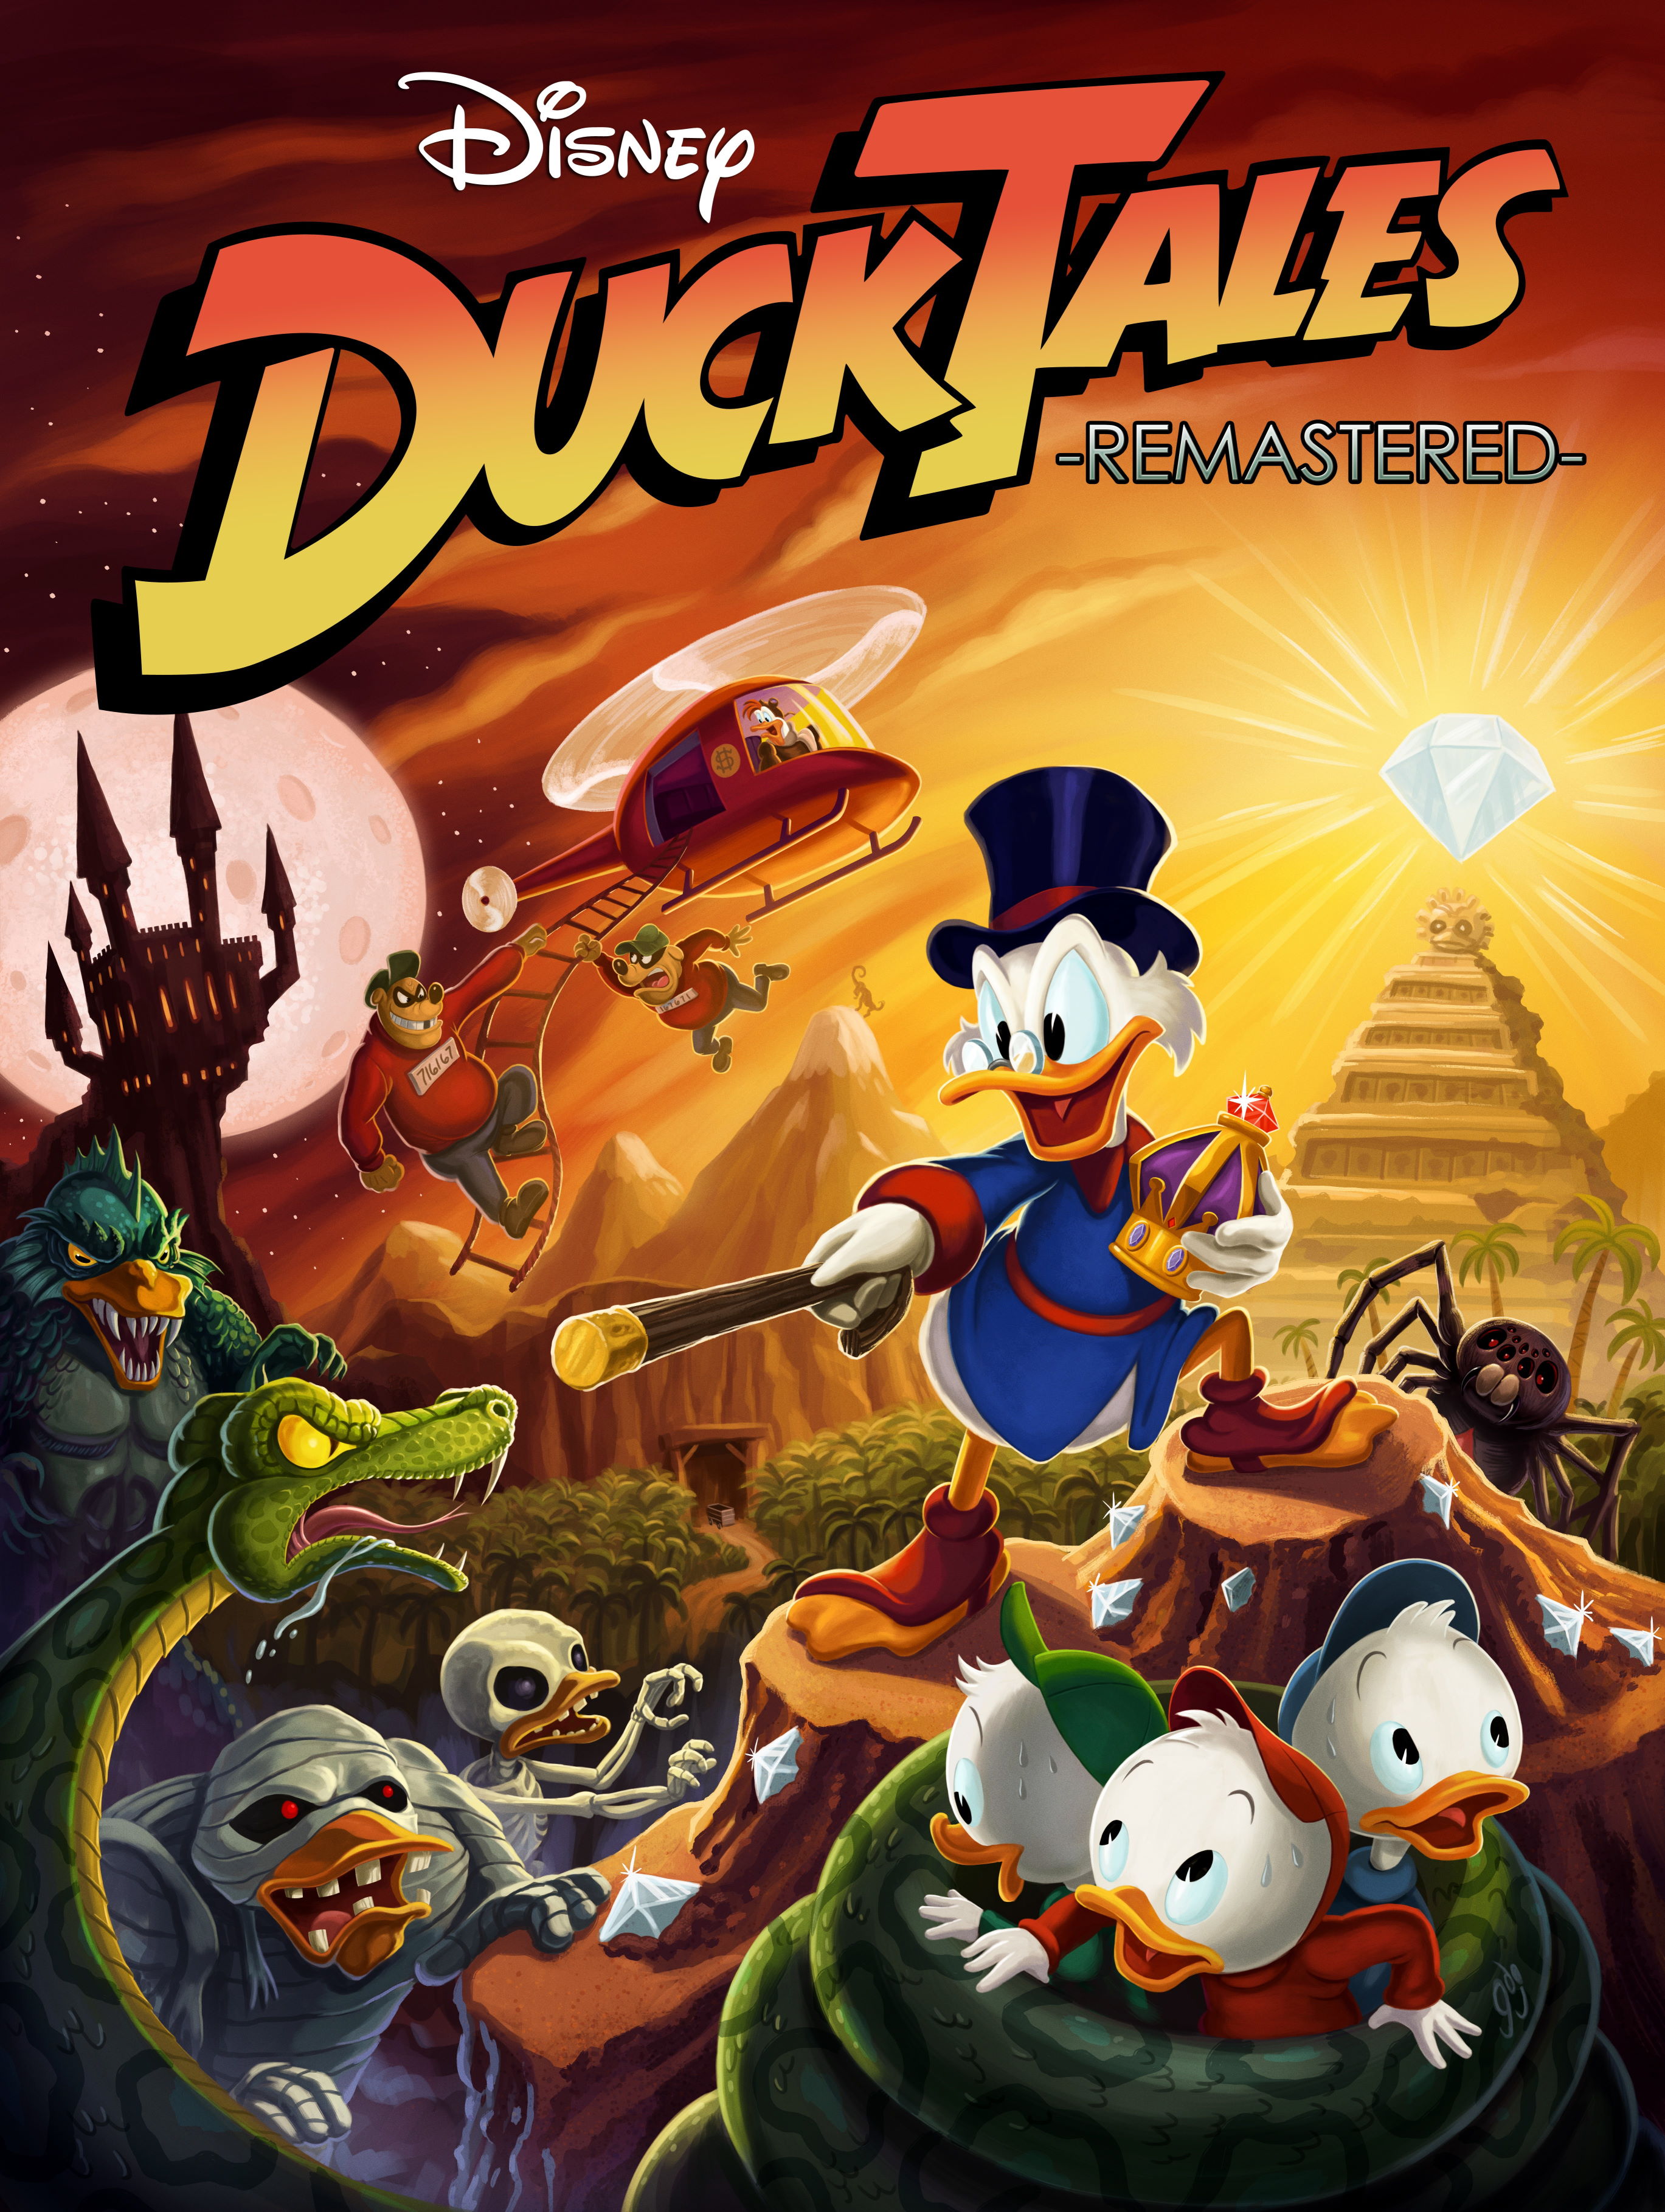 Ducktales Remastered Images Launchbox Games Database